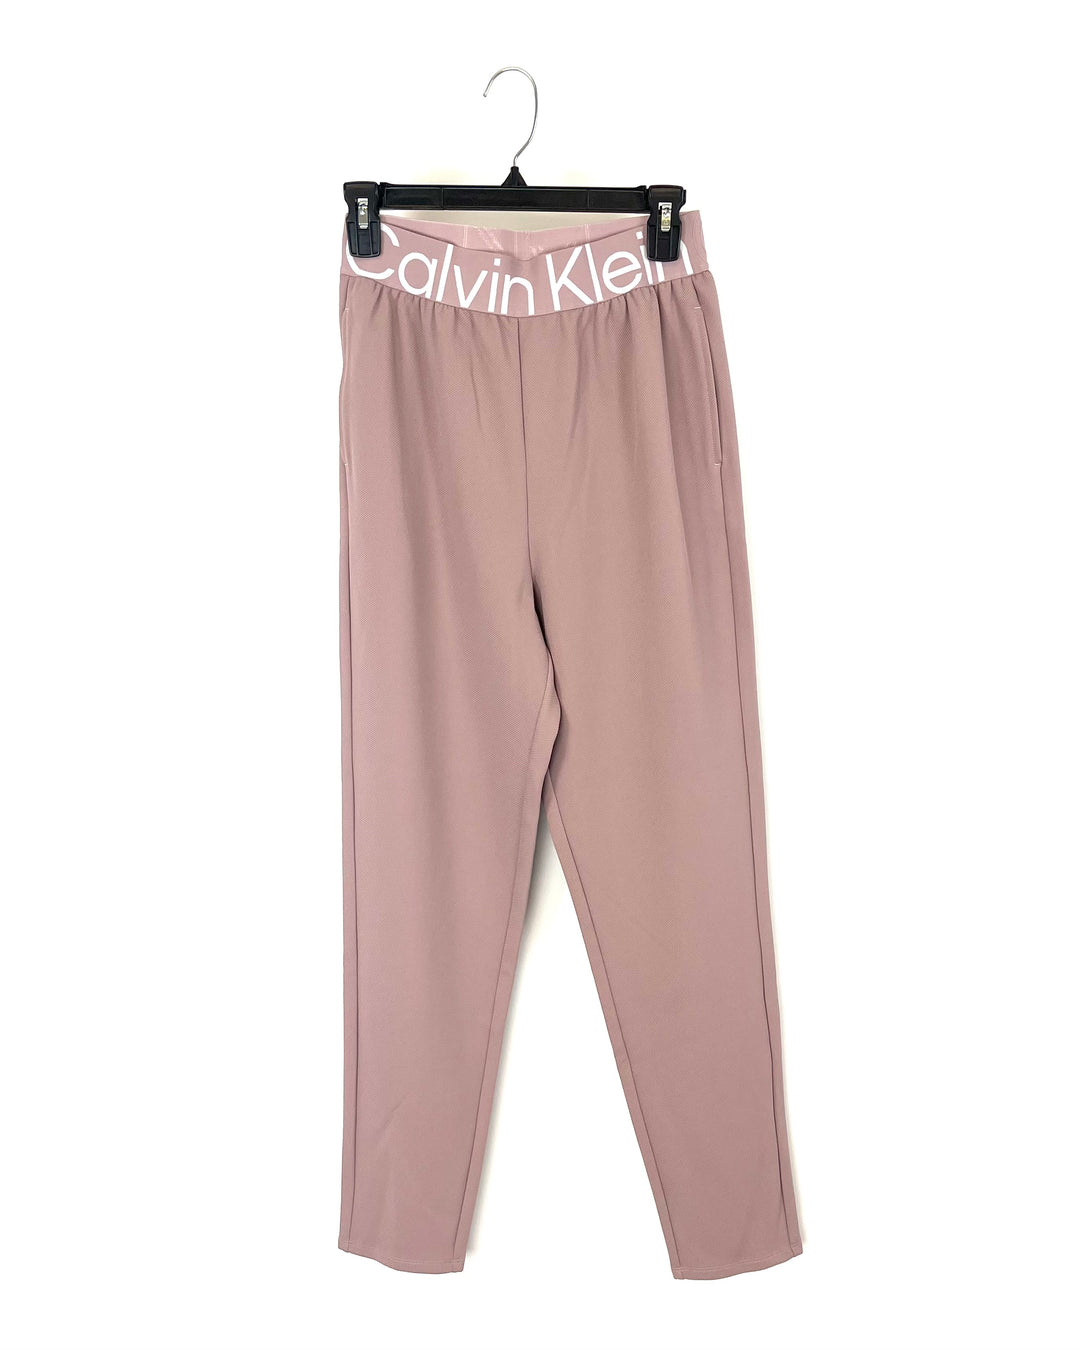 Dusty Pink Athletic Pants - Small